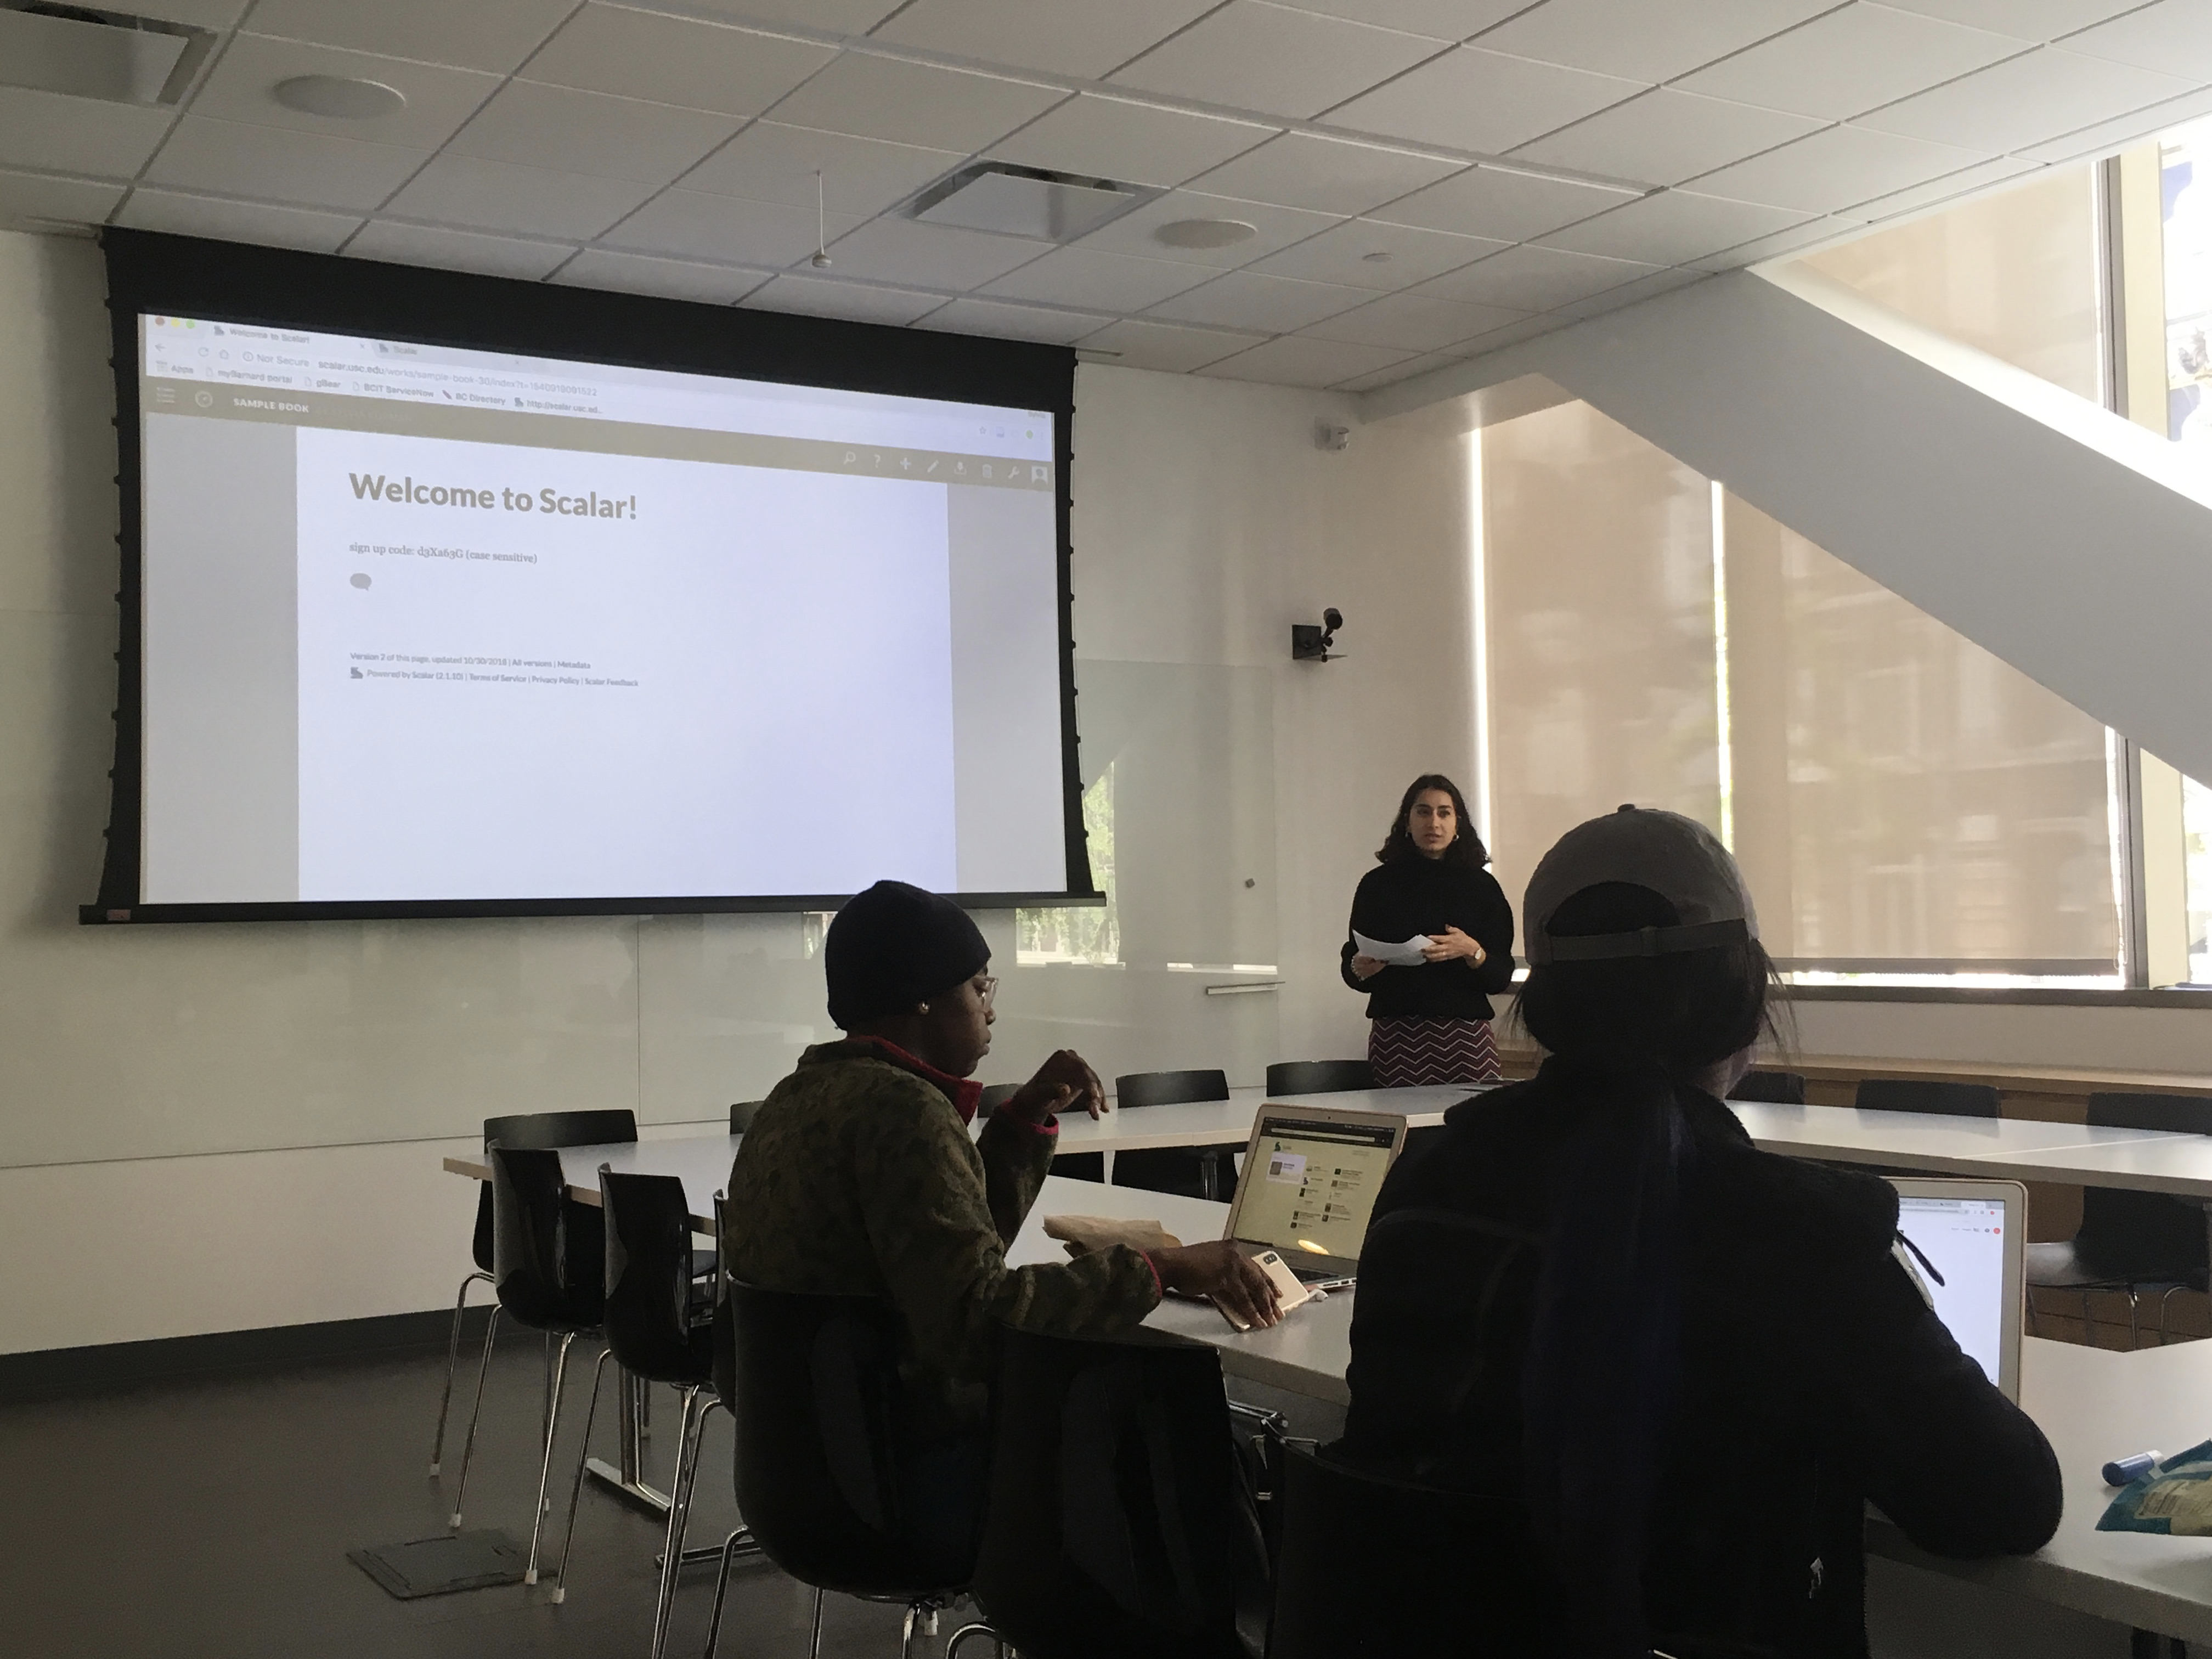 Digital Scholarship Librarian Madiha Choksi lectures in front of a screen that says Welcome to Scalar!